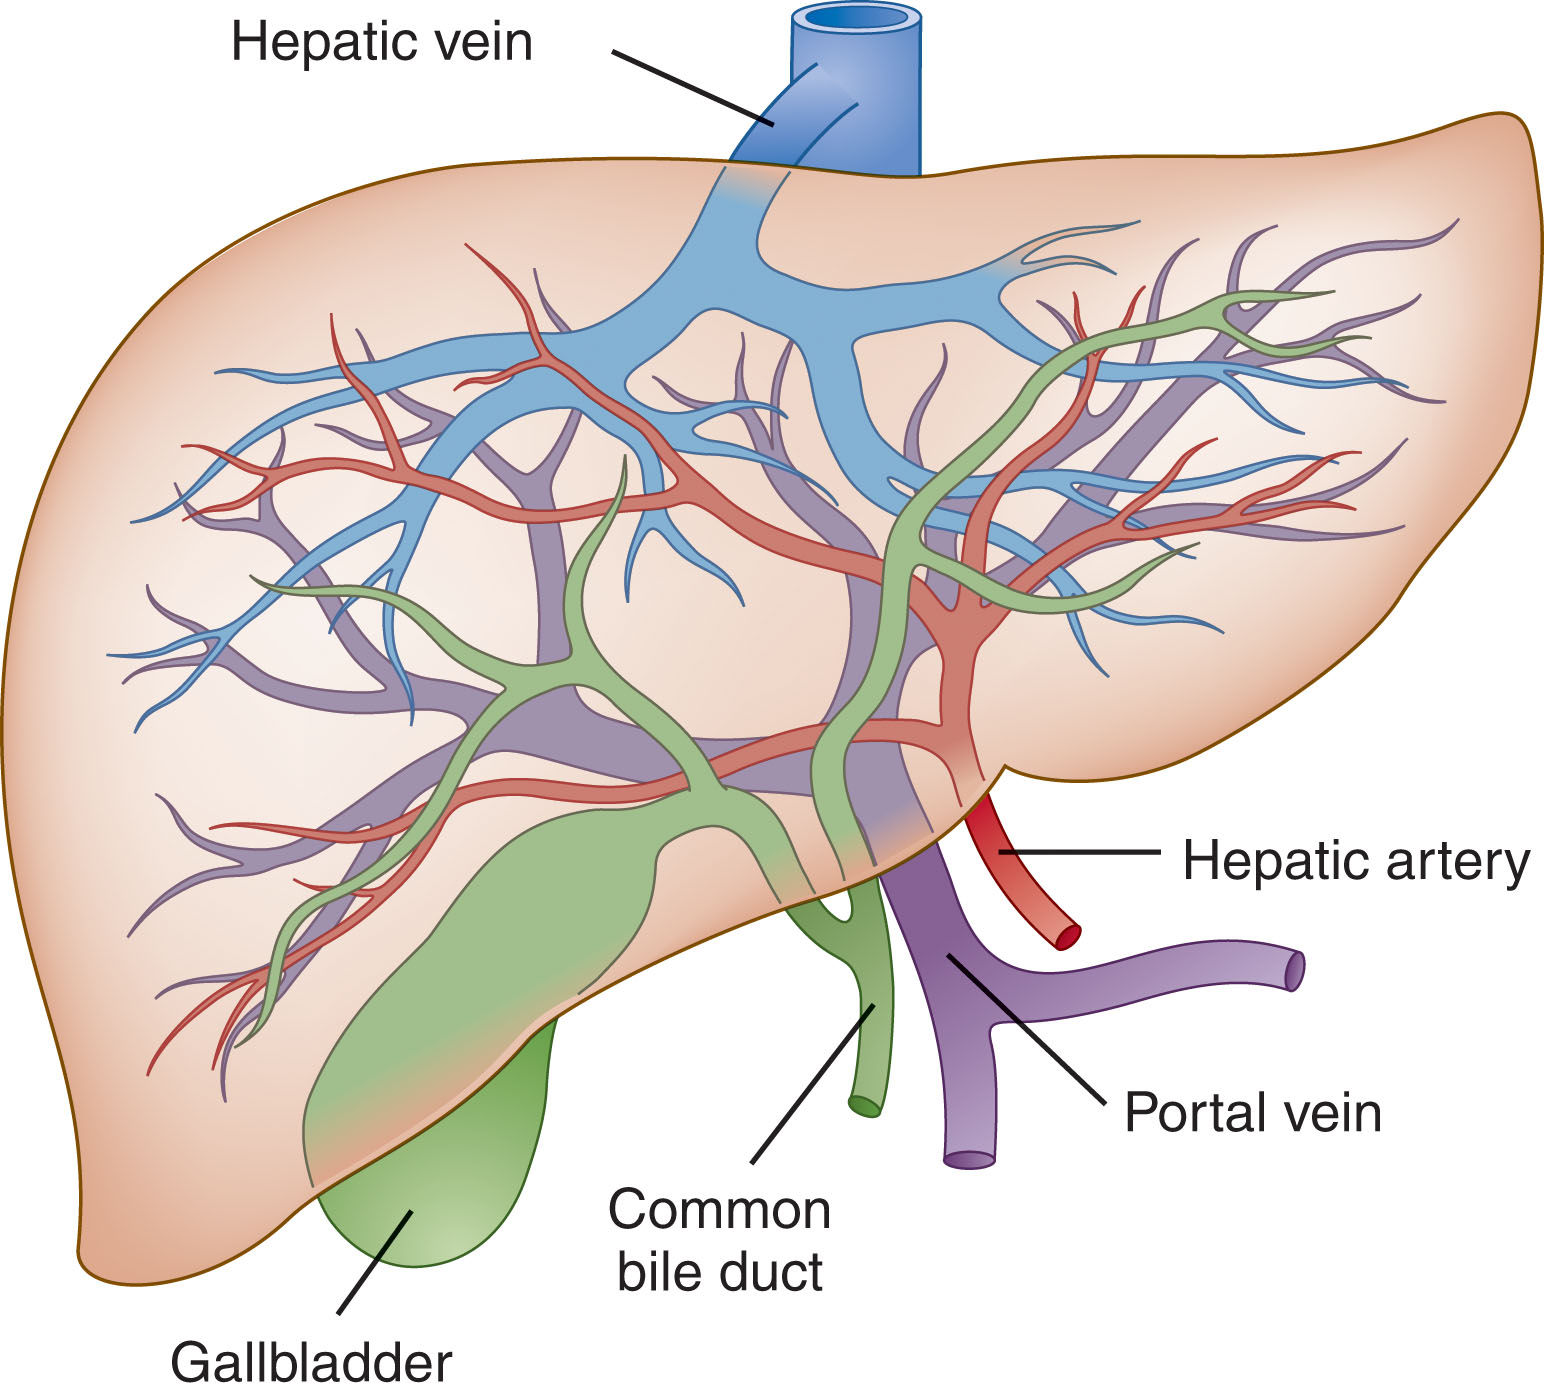 Fig. 10.2, Vascular and ductal system of the liver and gallbladder.